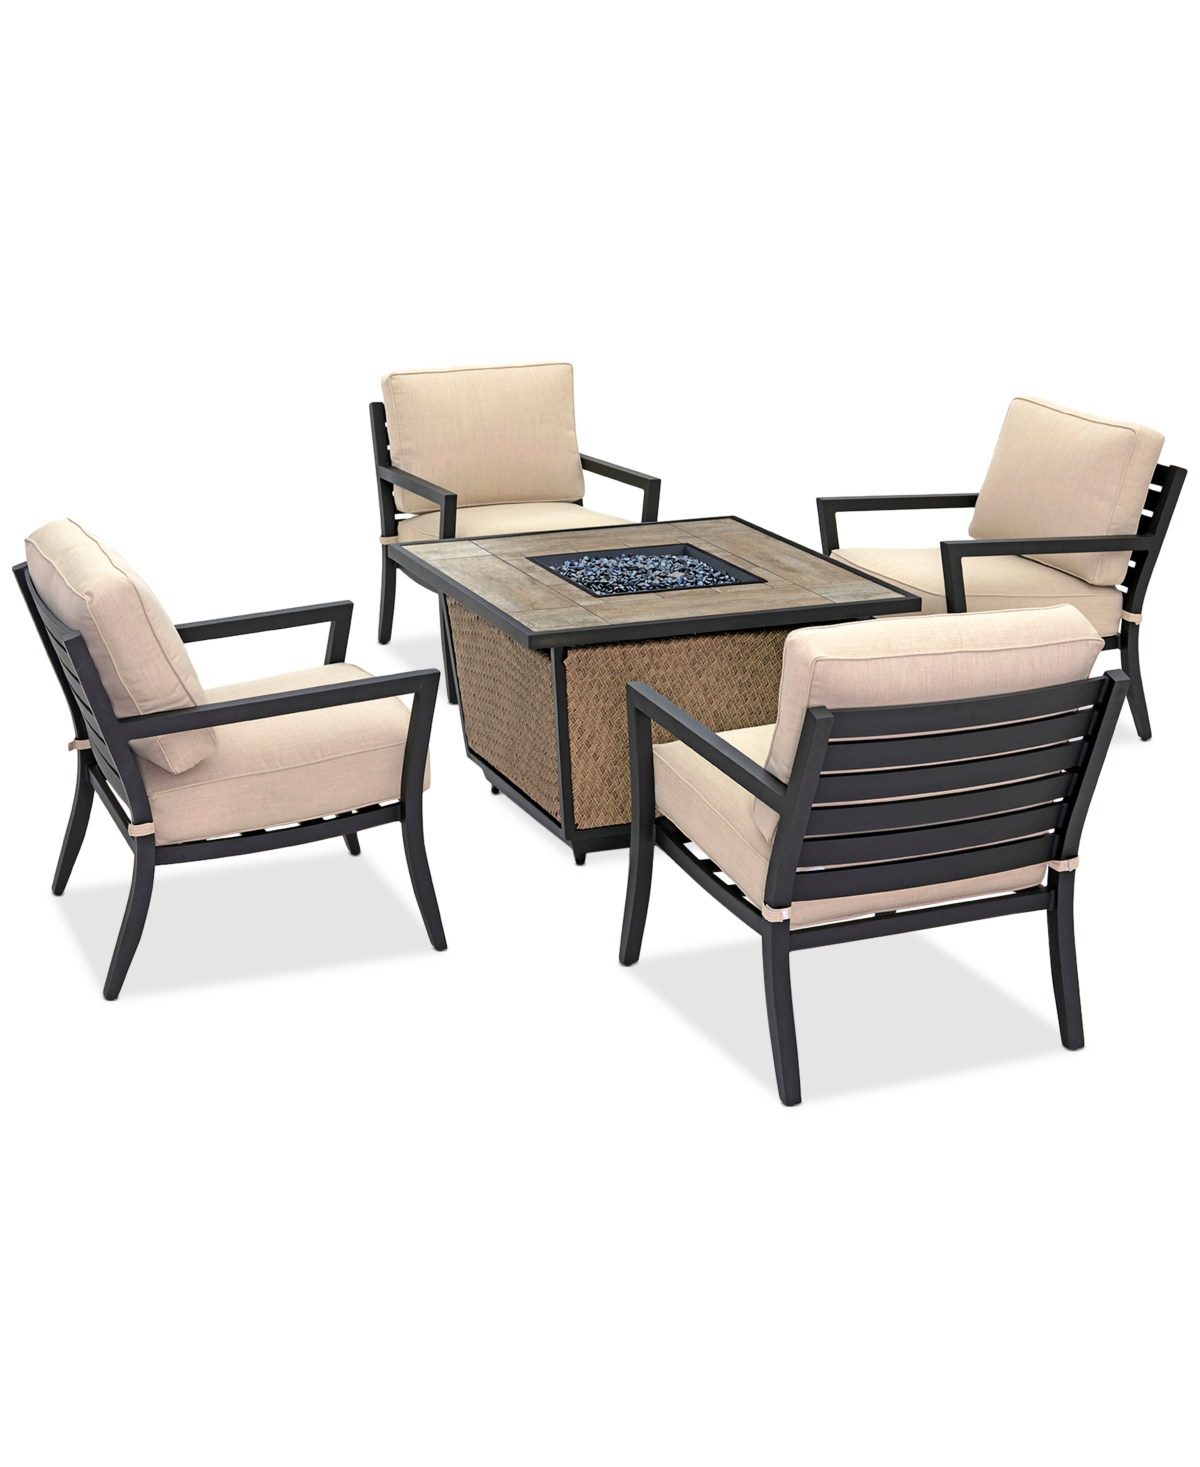 Agio Astaire Outdoor 5-pc. Chat Set (1 Fire Pit & 4 Rocker Chairs), Created For Macy's In Solartex Linen